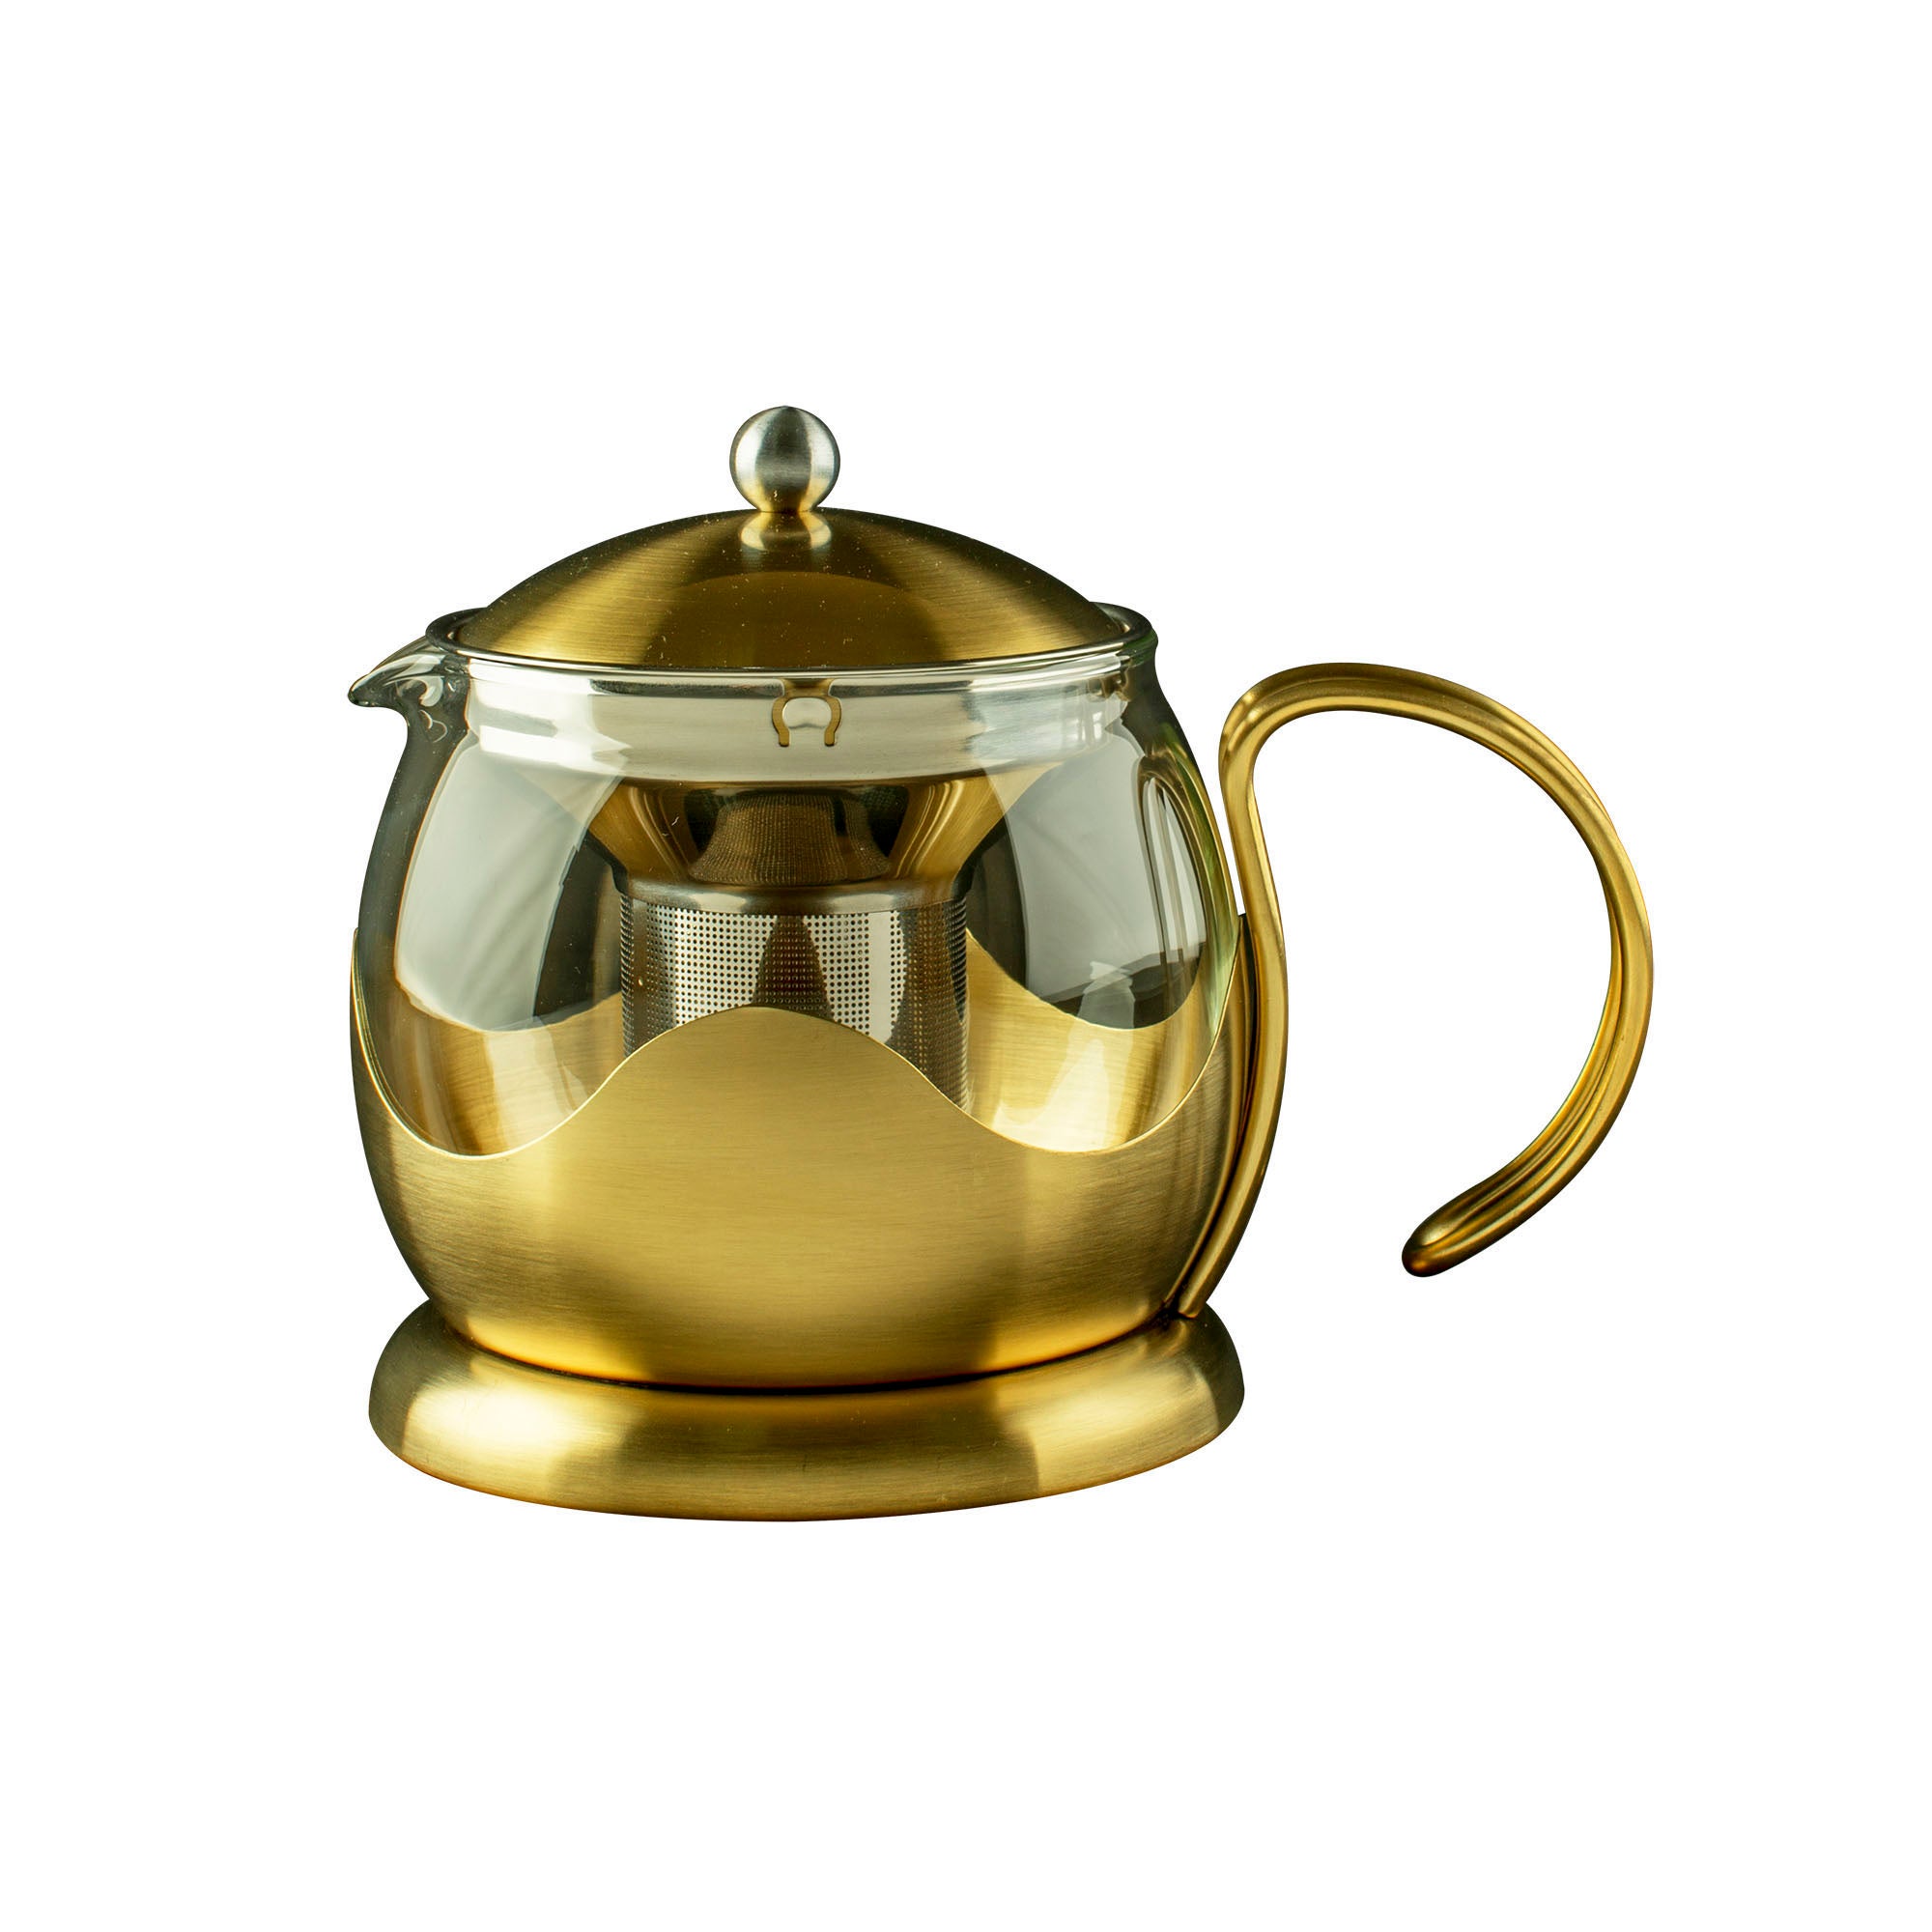 La Cafetiere 4 Cup Brushed Gold Teapot